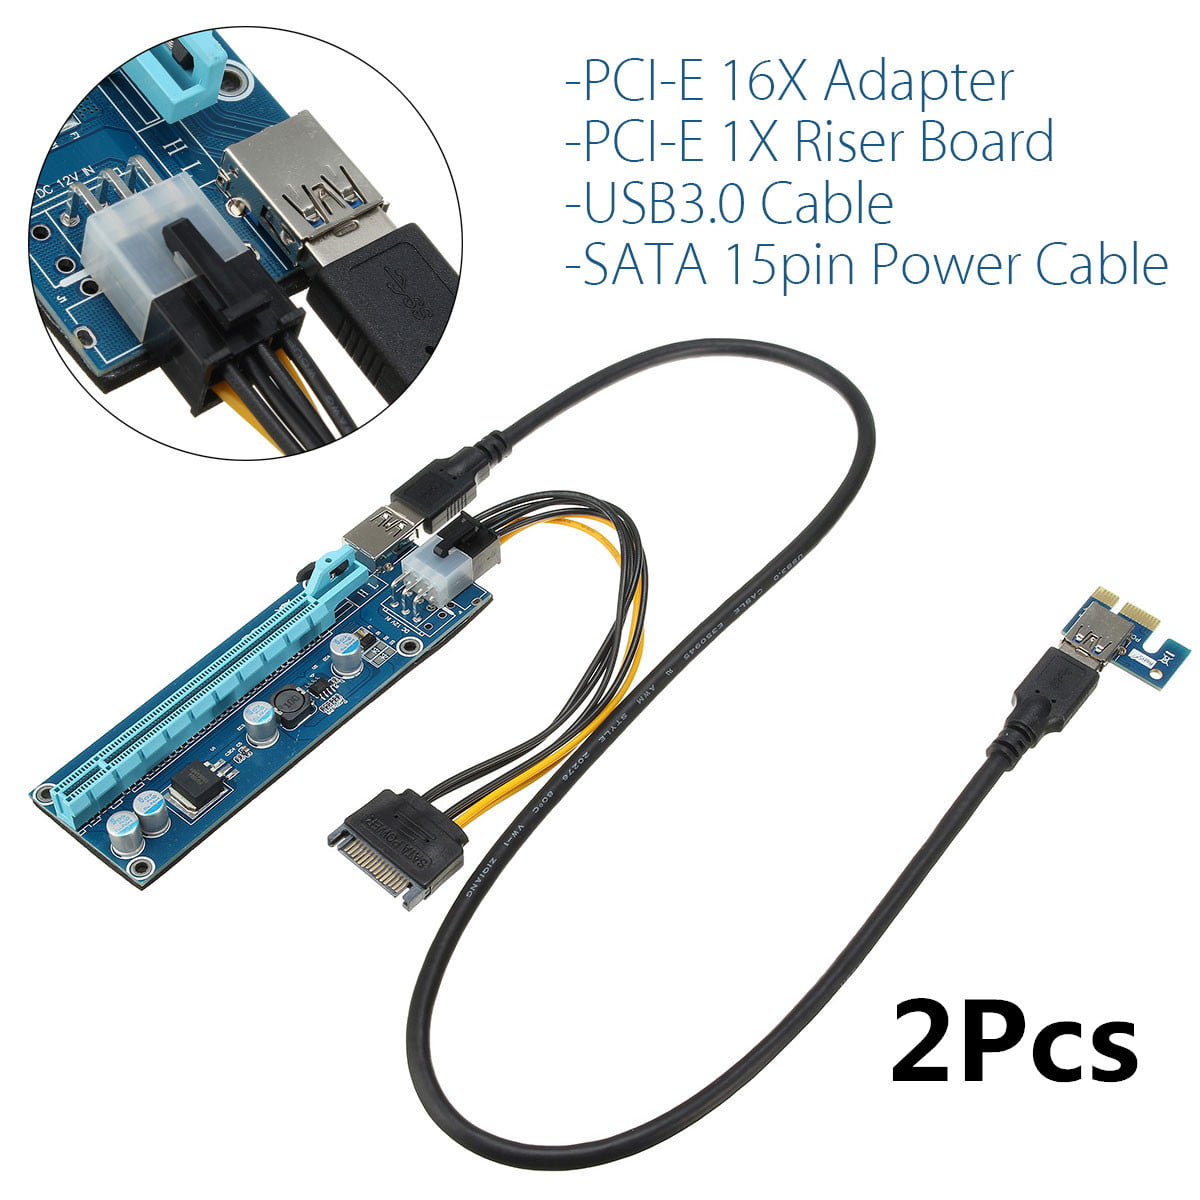 Cable Length: 0.6m, Color: Black Cables PCI-E Express 1x to 16x 6PIN Mining Extender Riser Card Adapter with USB 3.0 Cable 2018 Cables 